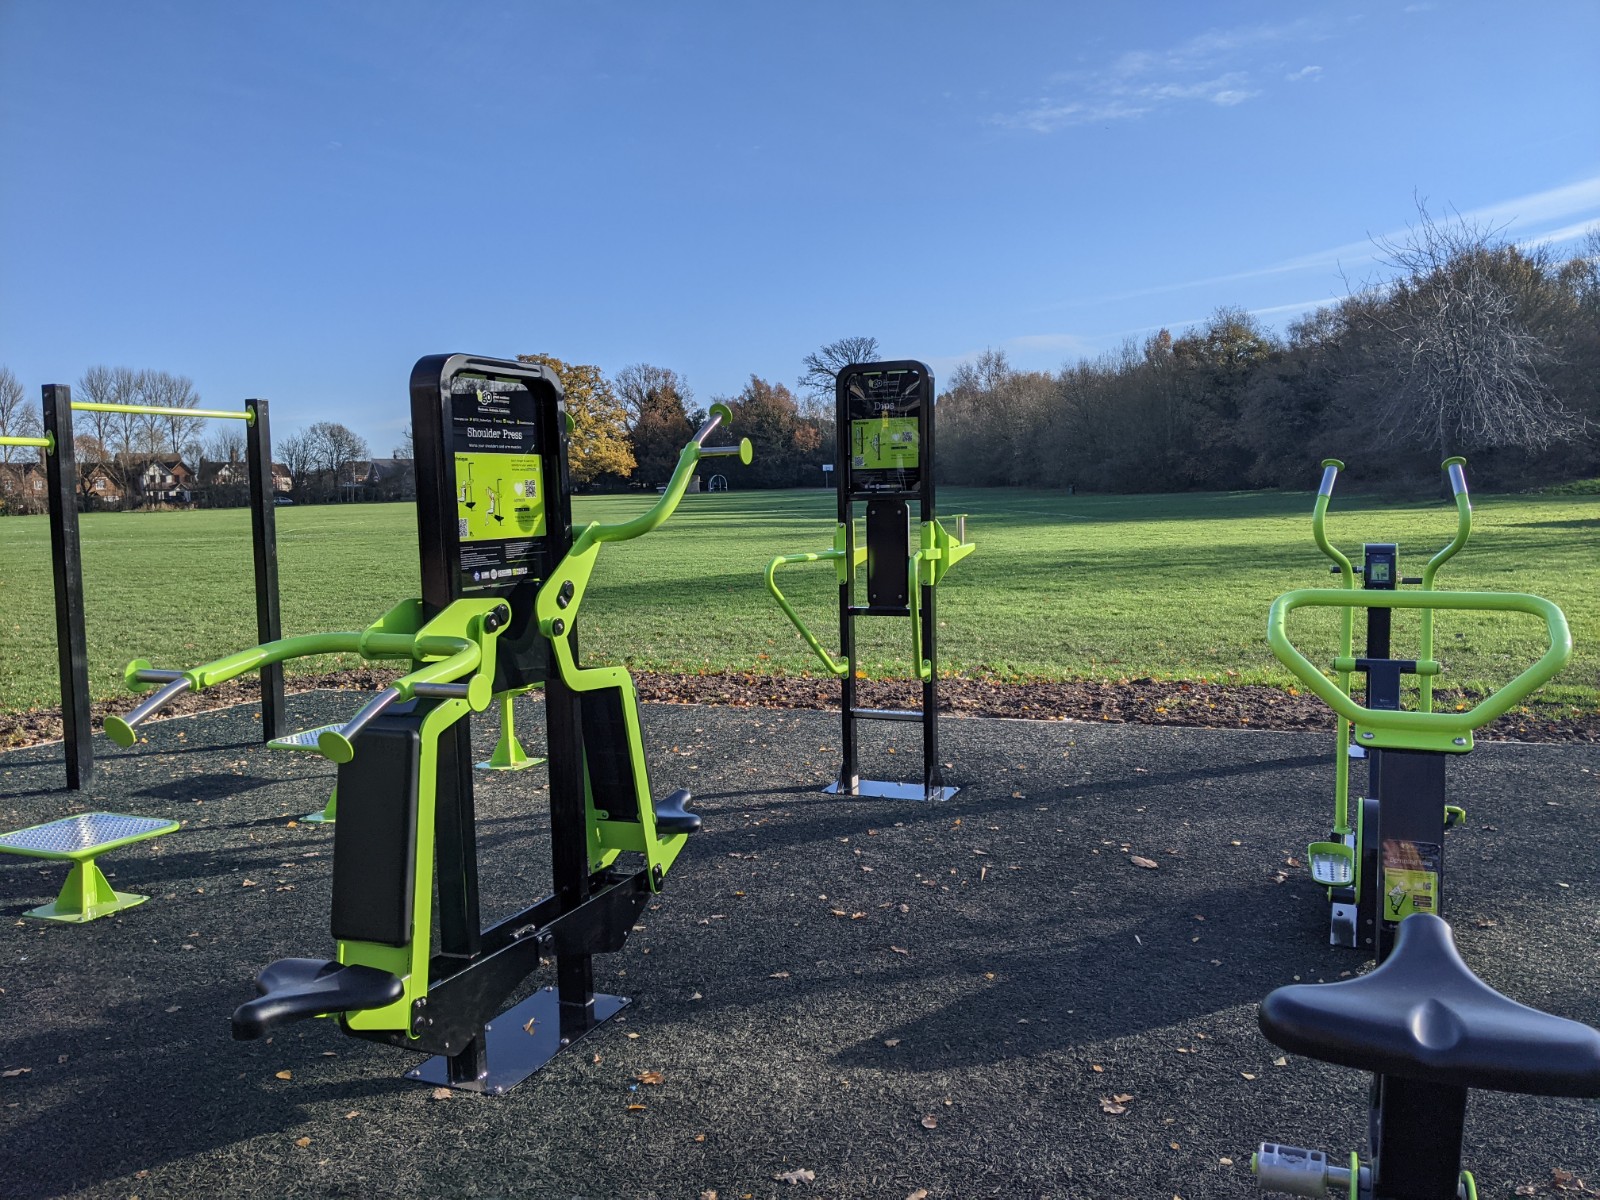 Outdoor gym at Bearwood Recreation Ground